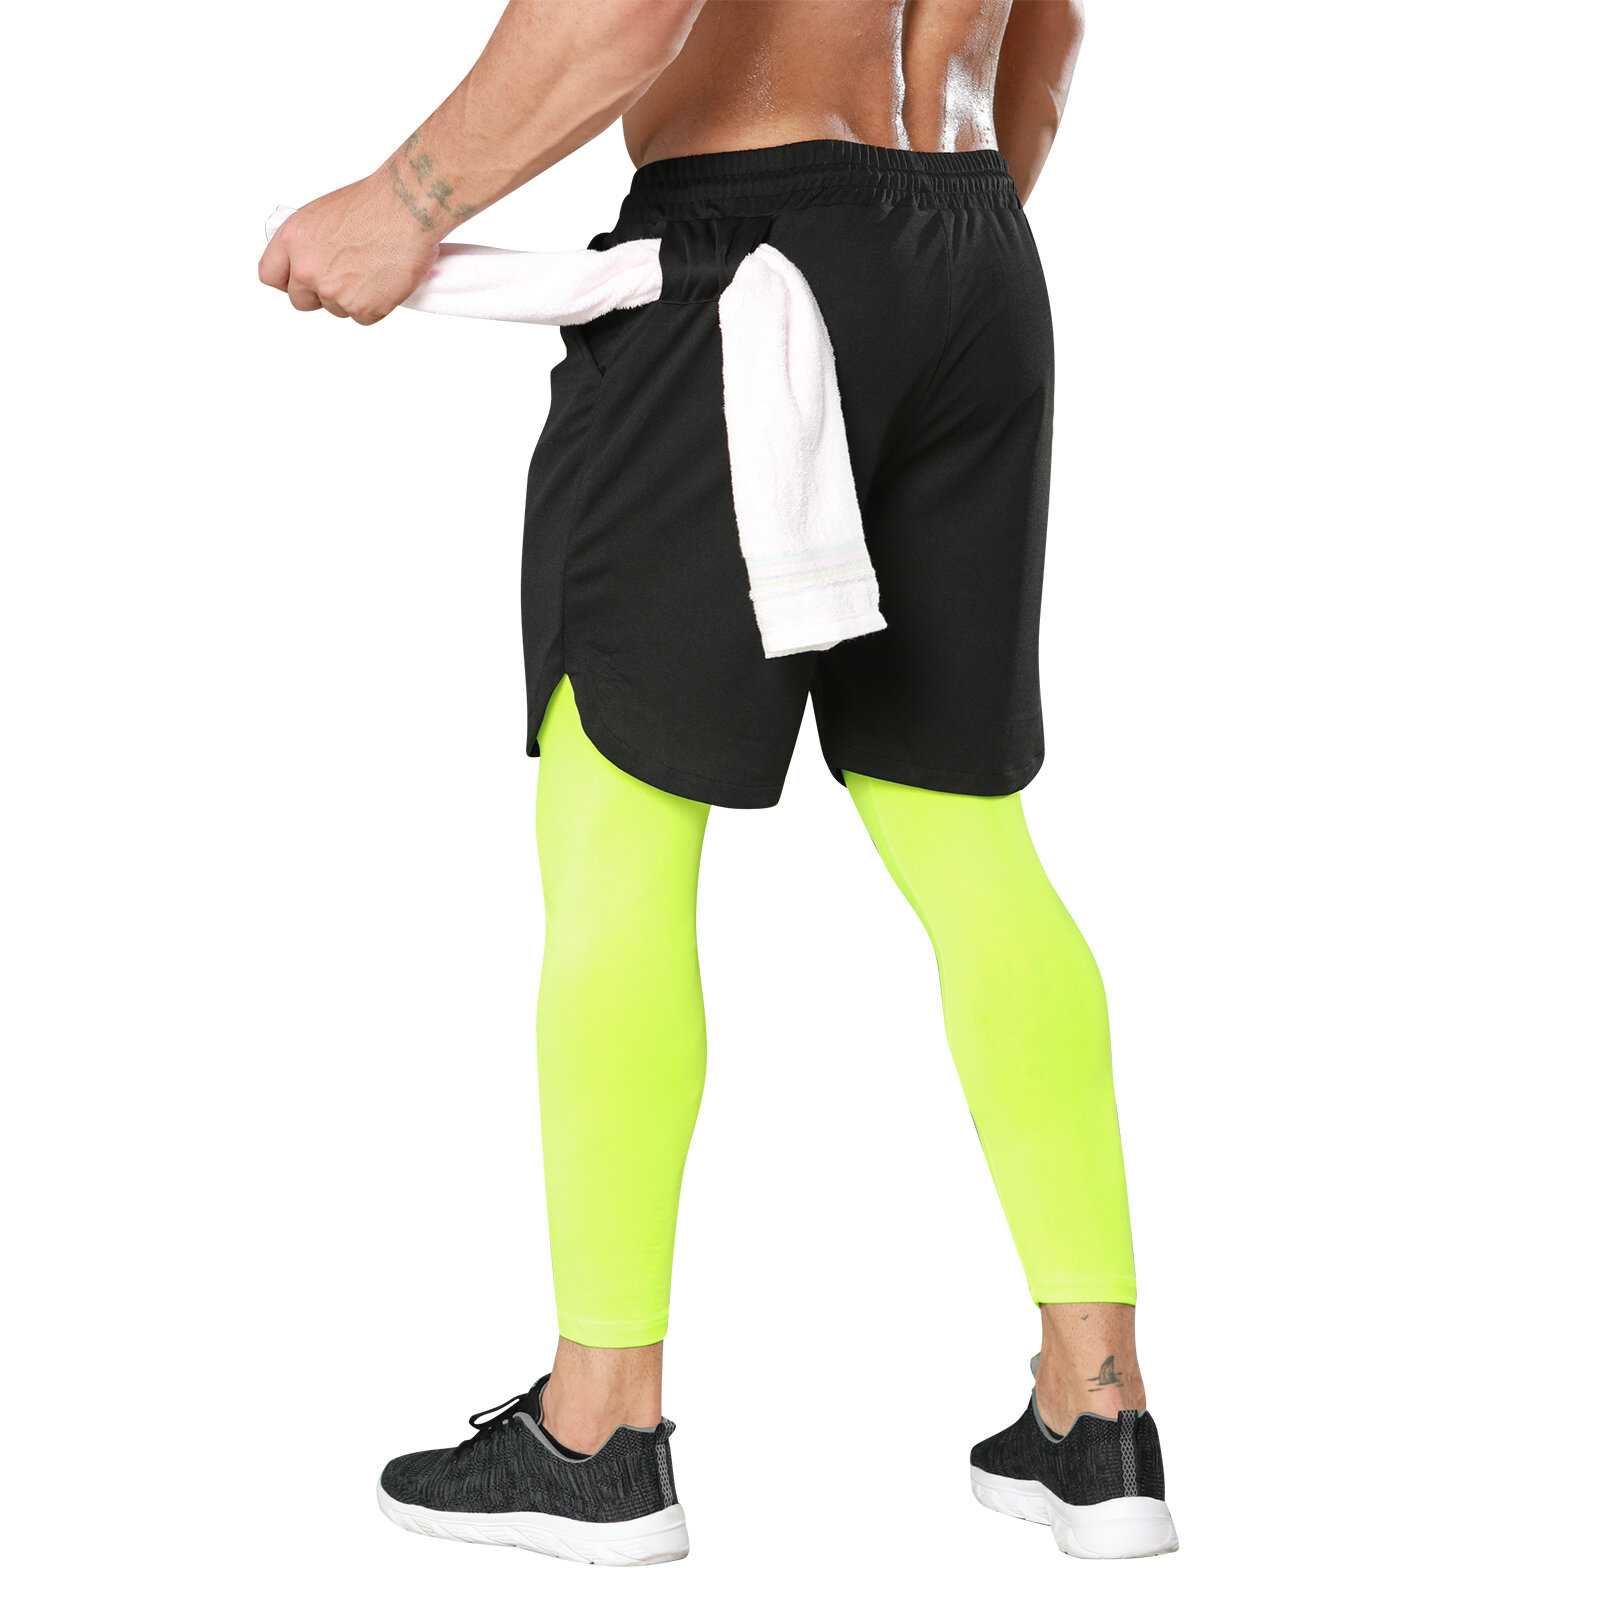 2MGL-Stretchable Tights for Men, 4-Way Lycra Athletic Shorts